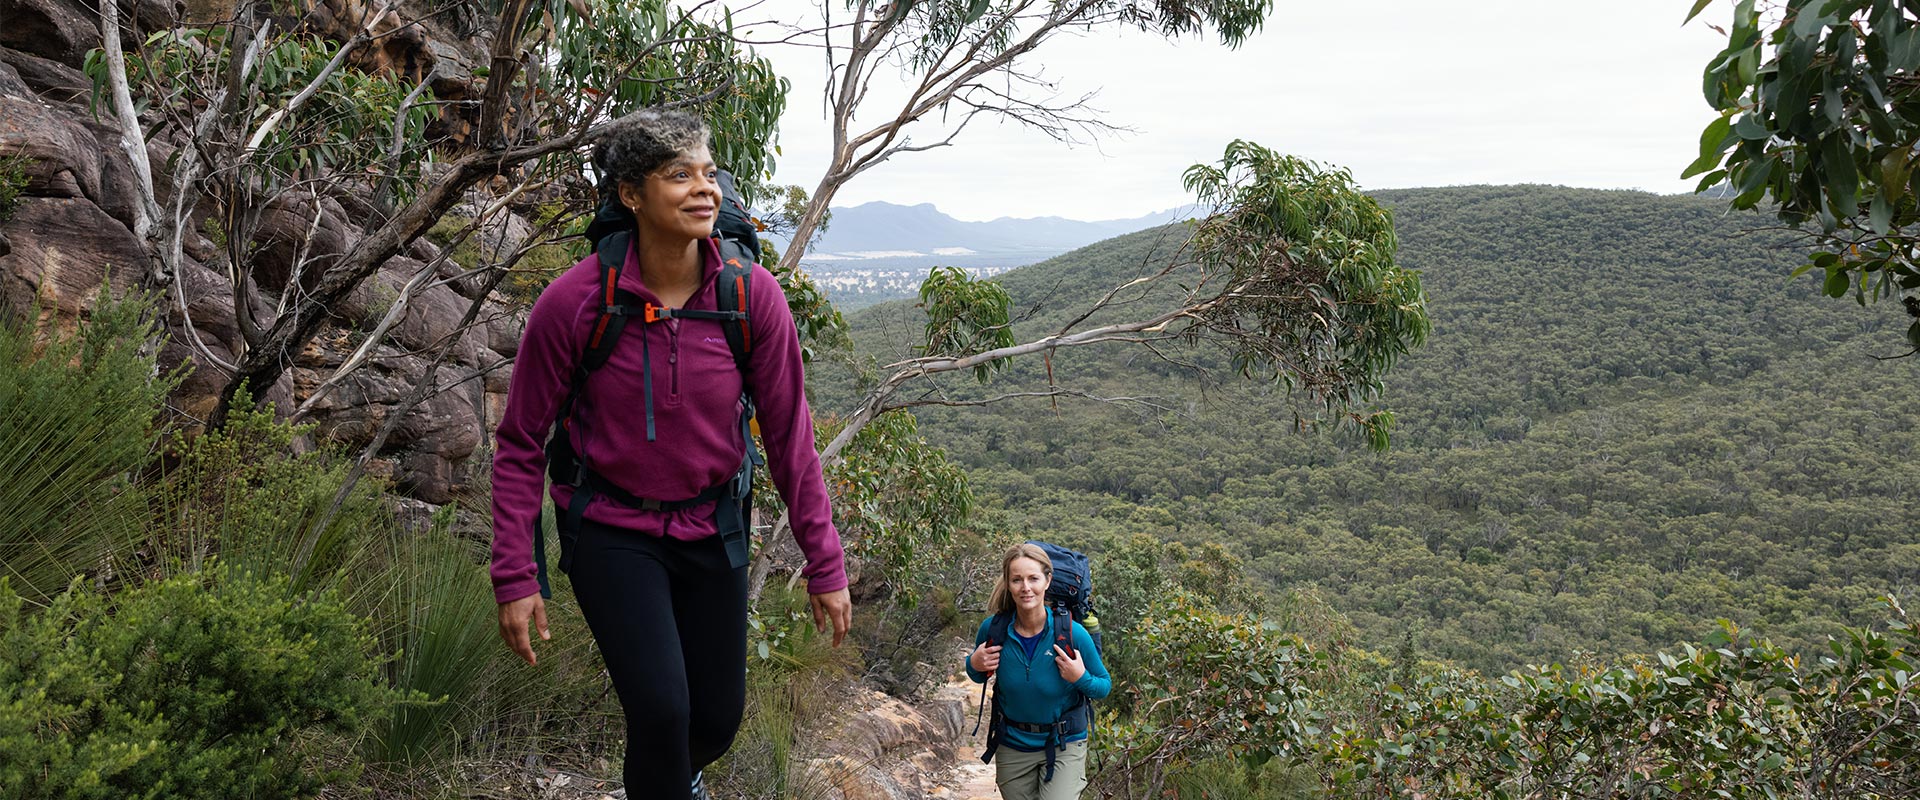 Two hikers ascend the lower slopes along a rocky trail surrounded by nearby hills and dense trees